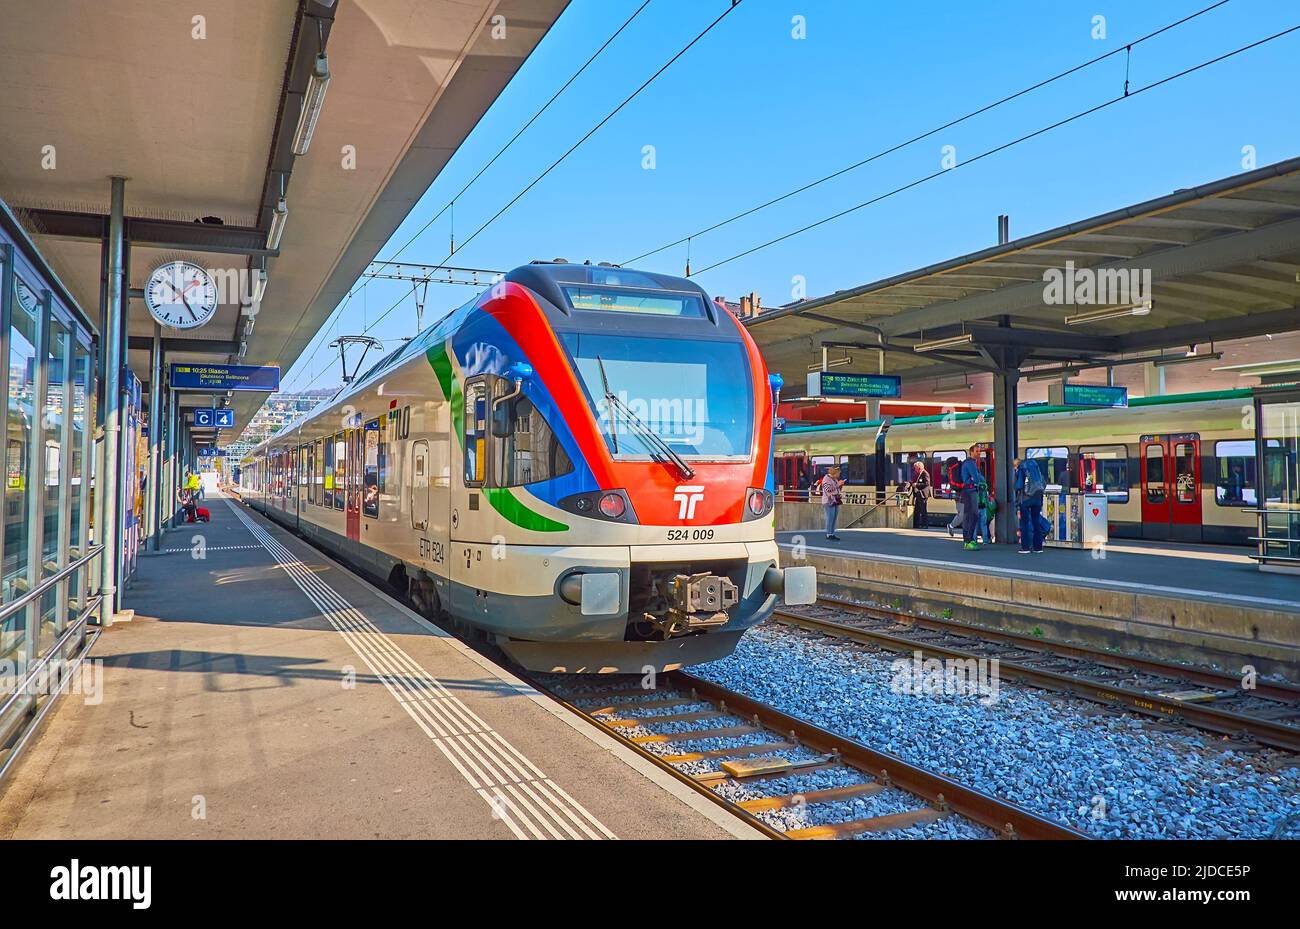 LUGANO, SWITZERLAND - MARCH 27, 2022: The TILO train arrives to the platform of Lugano Railway Station, on March 27 in Lugano Stock Photo